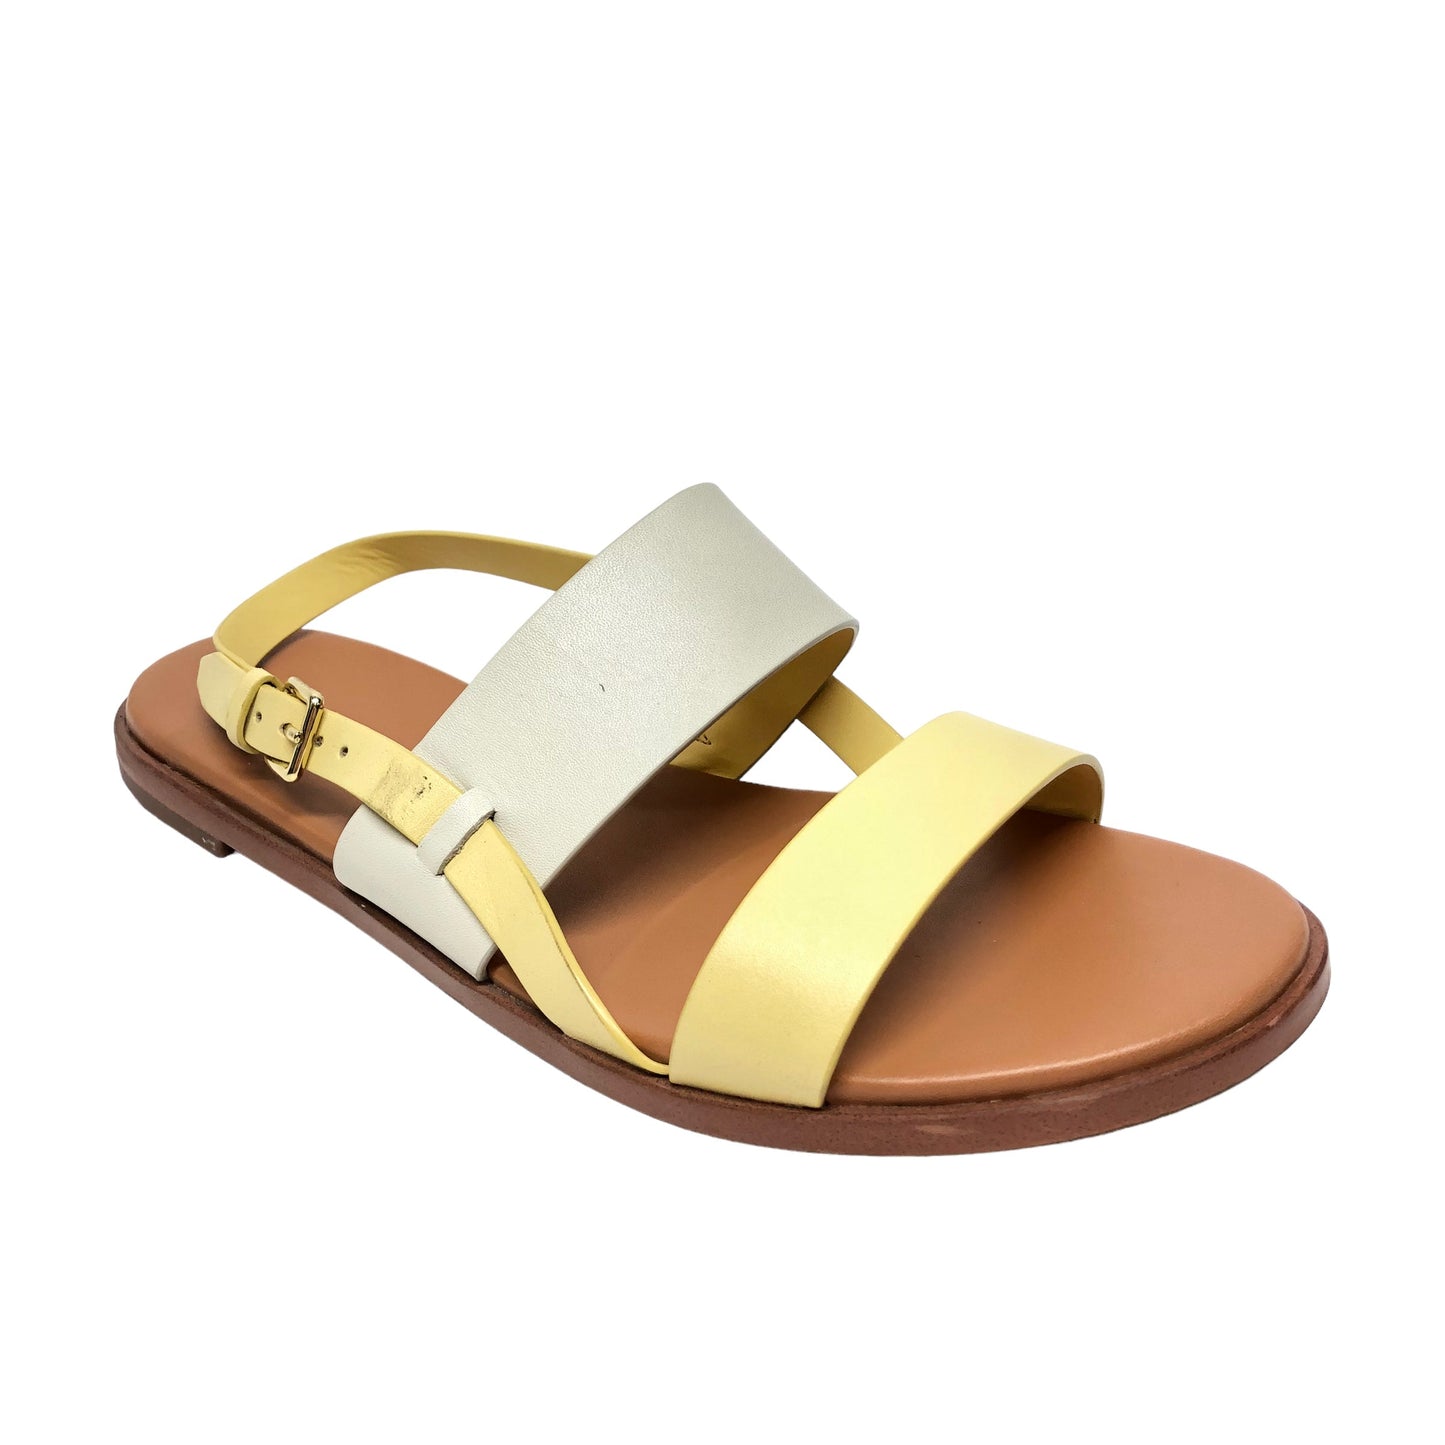 White & Yellow Sandals Flats Cole-haan, Size 8.5